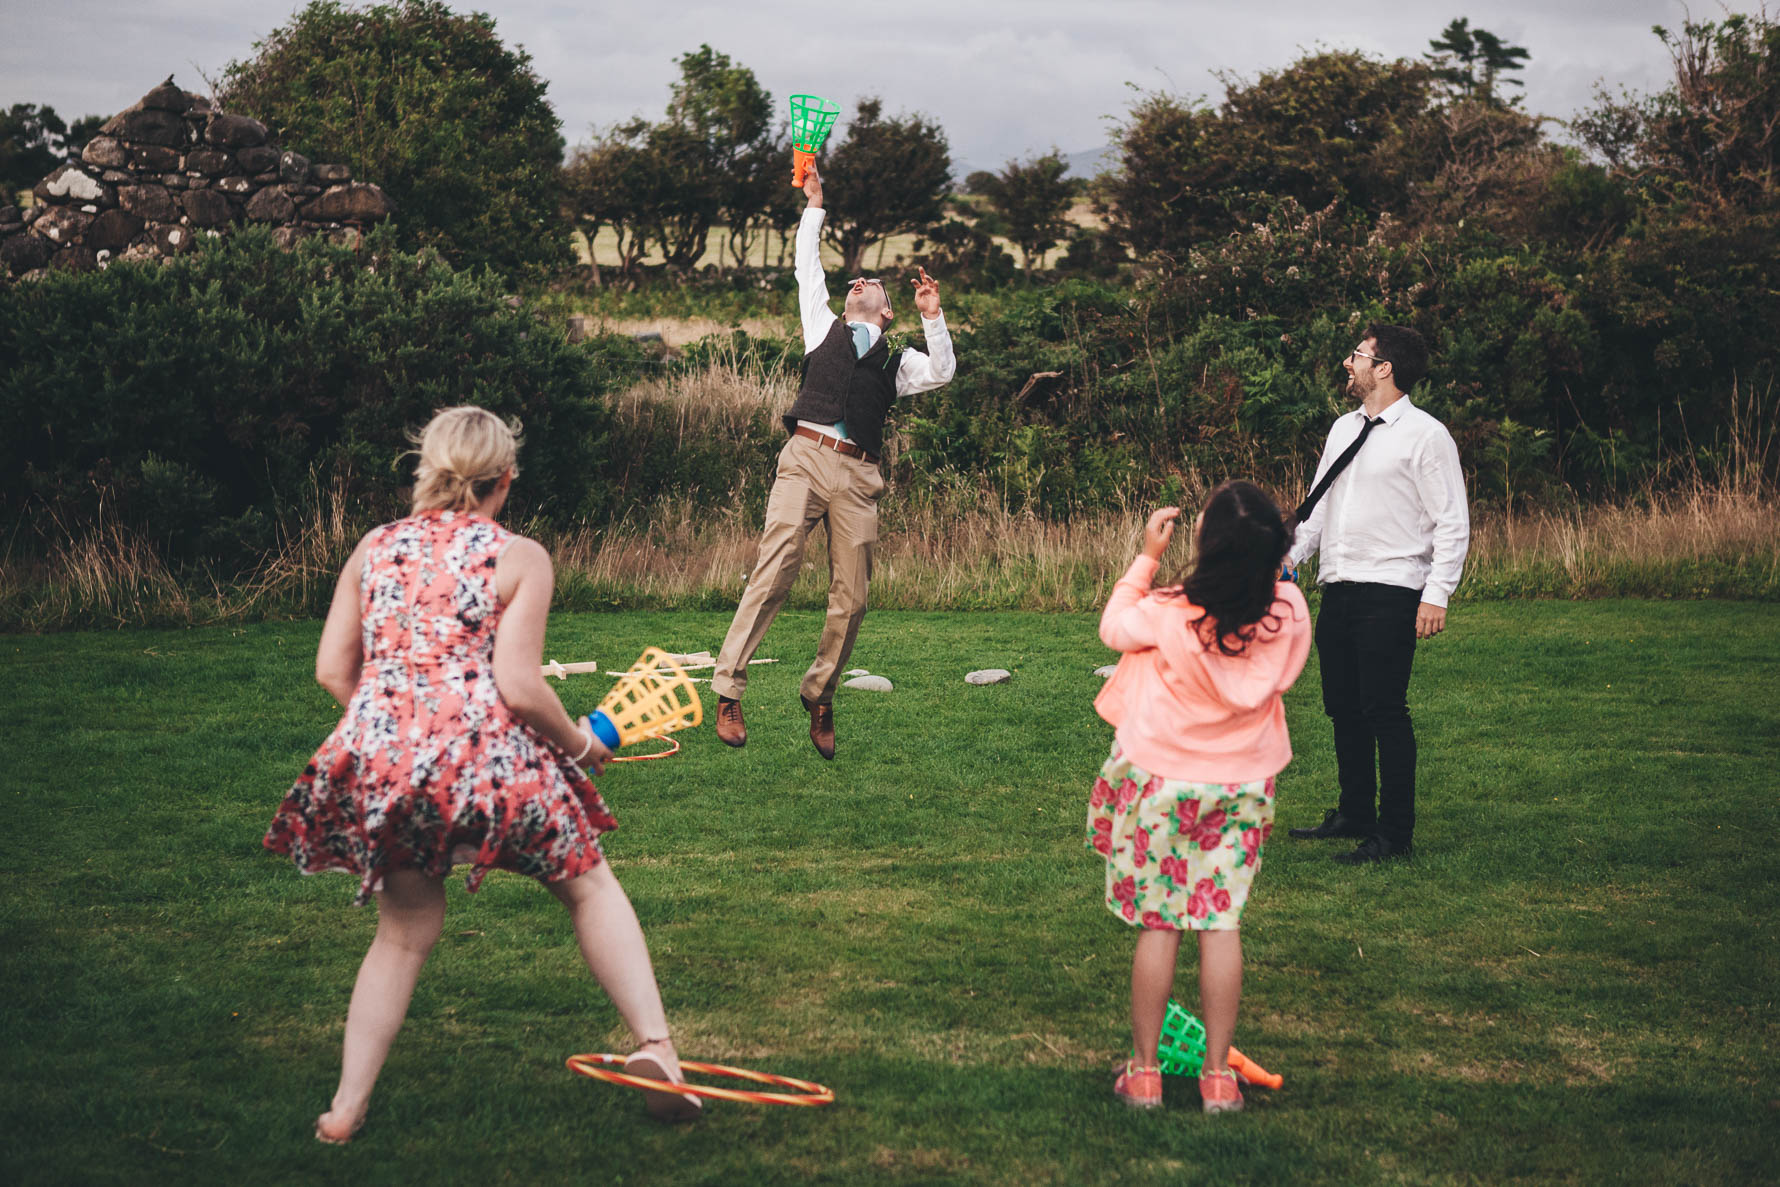 Wedding guests playing a game of catch with a male guest jumping up in the air to catch a ball in a large orange and green cone shaped device